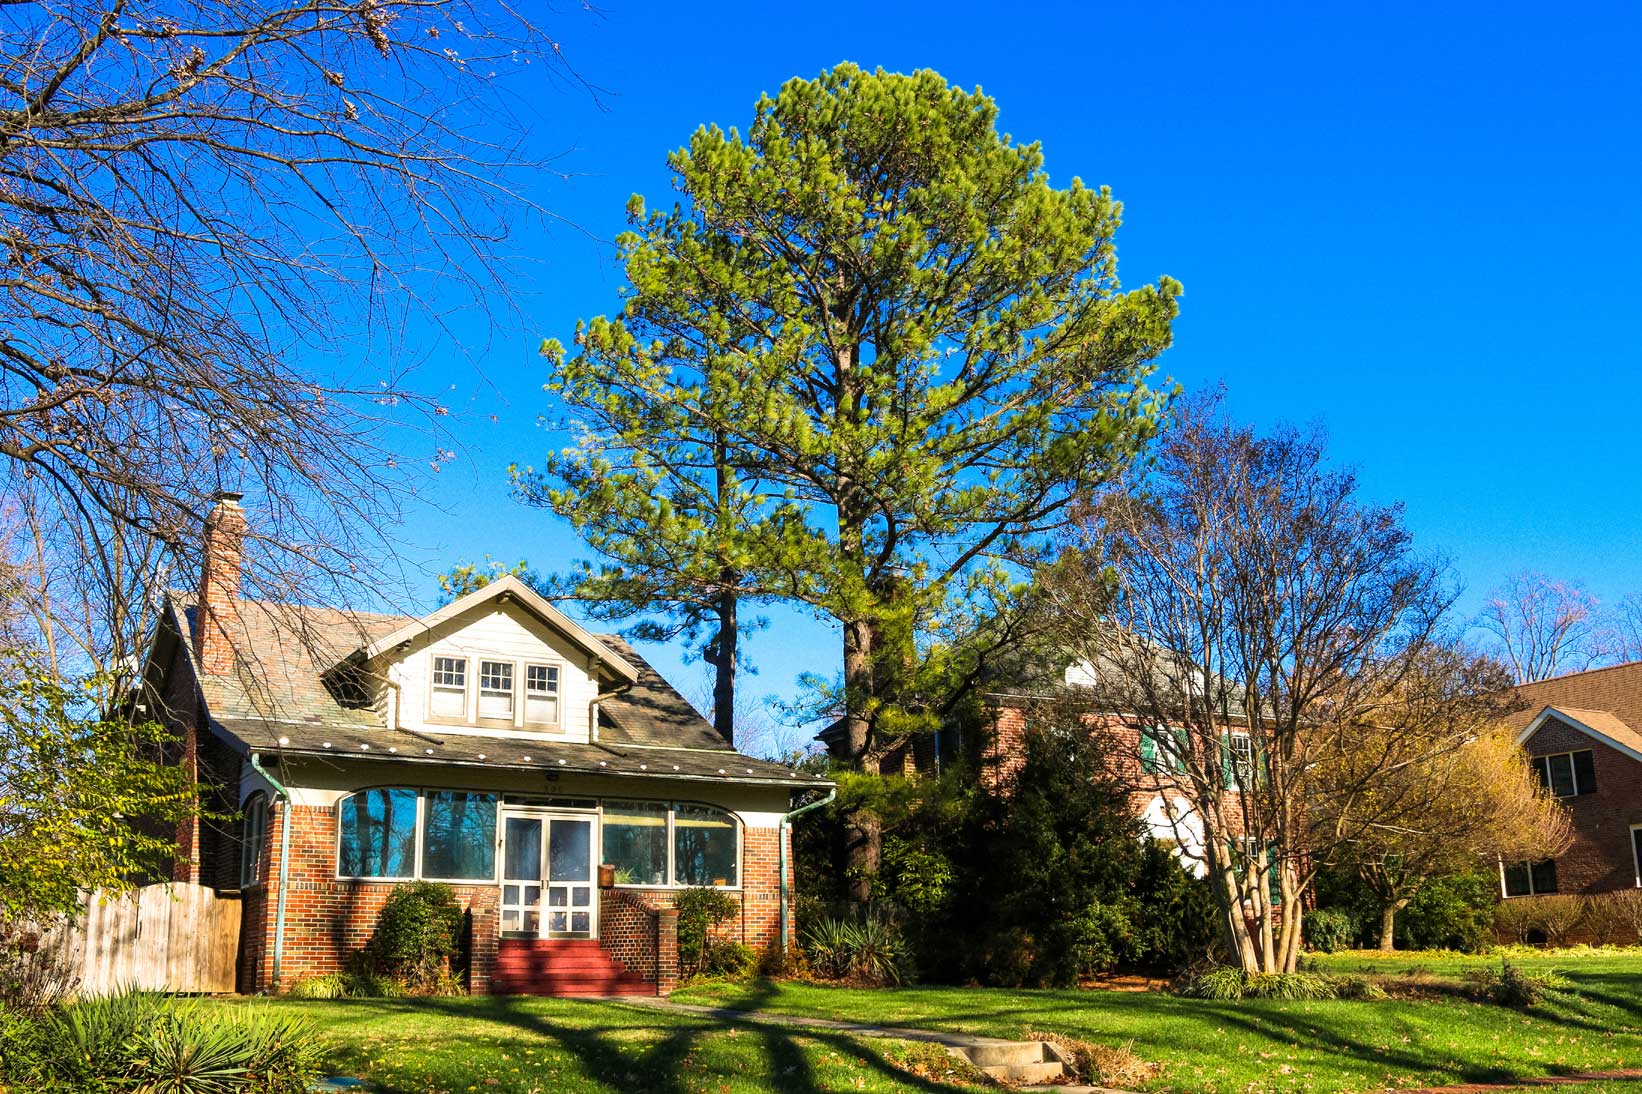 Single family home with tree in Rockville, MD